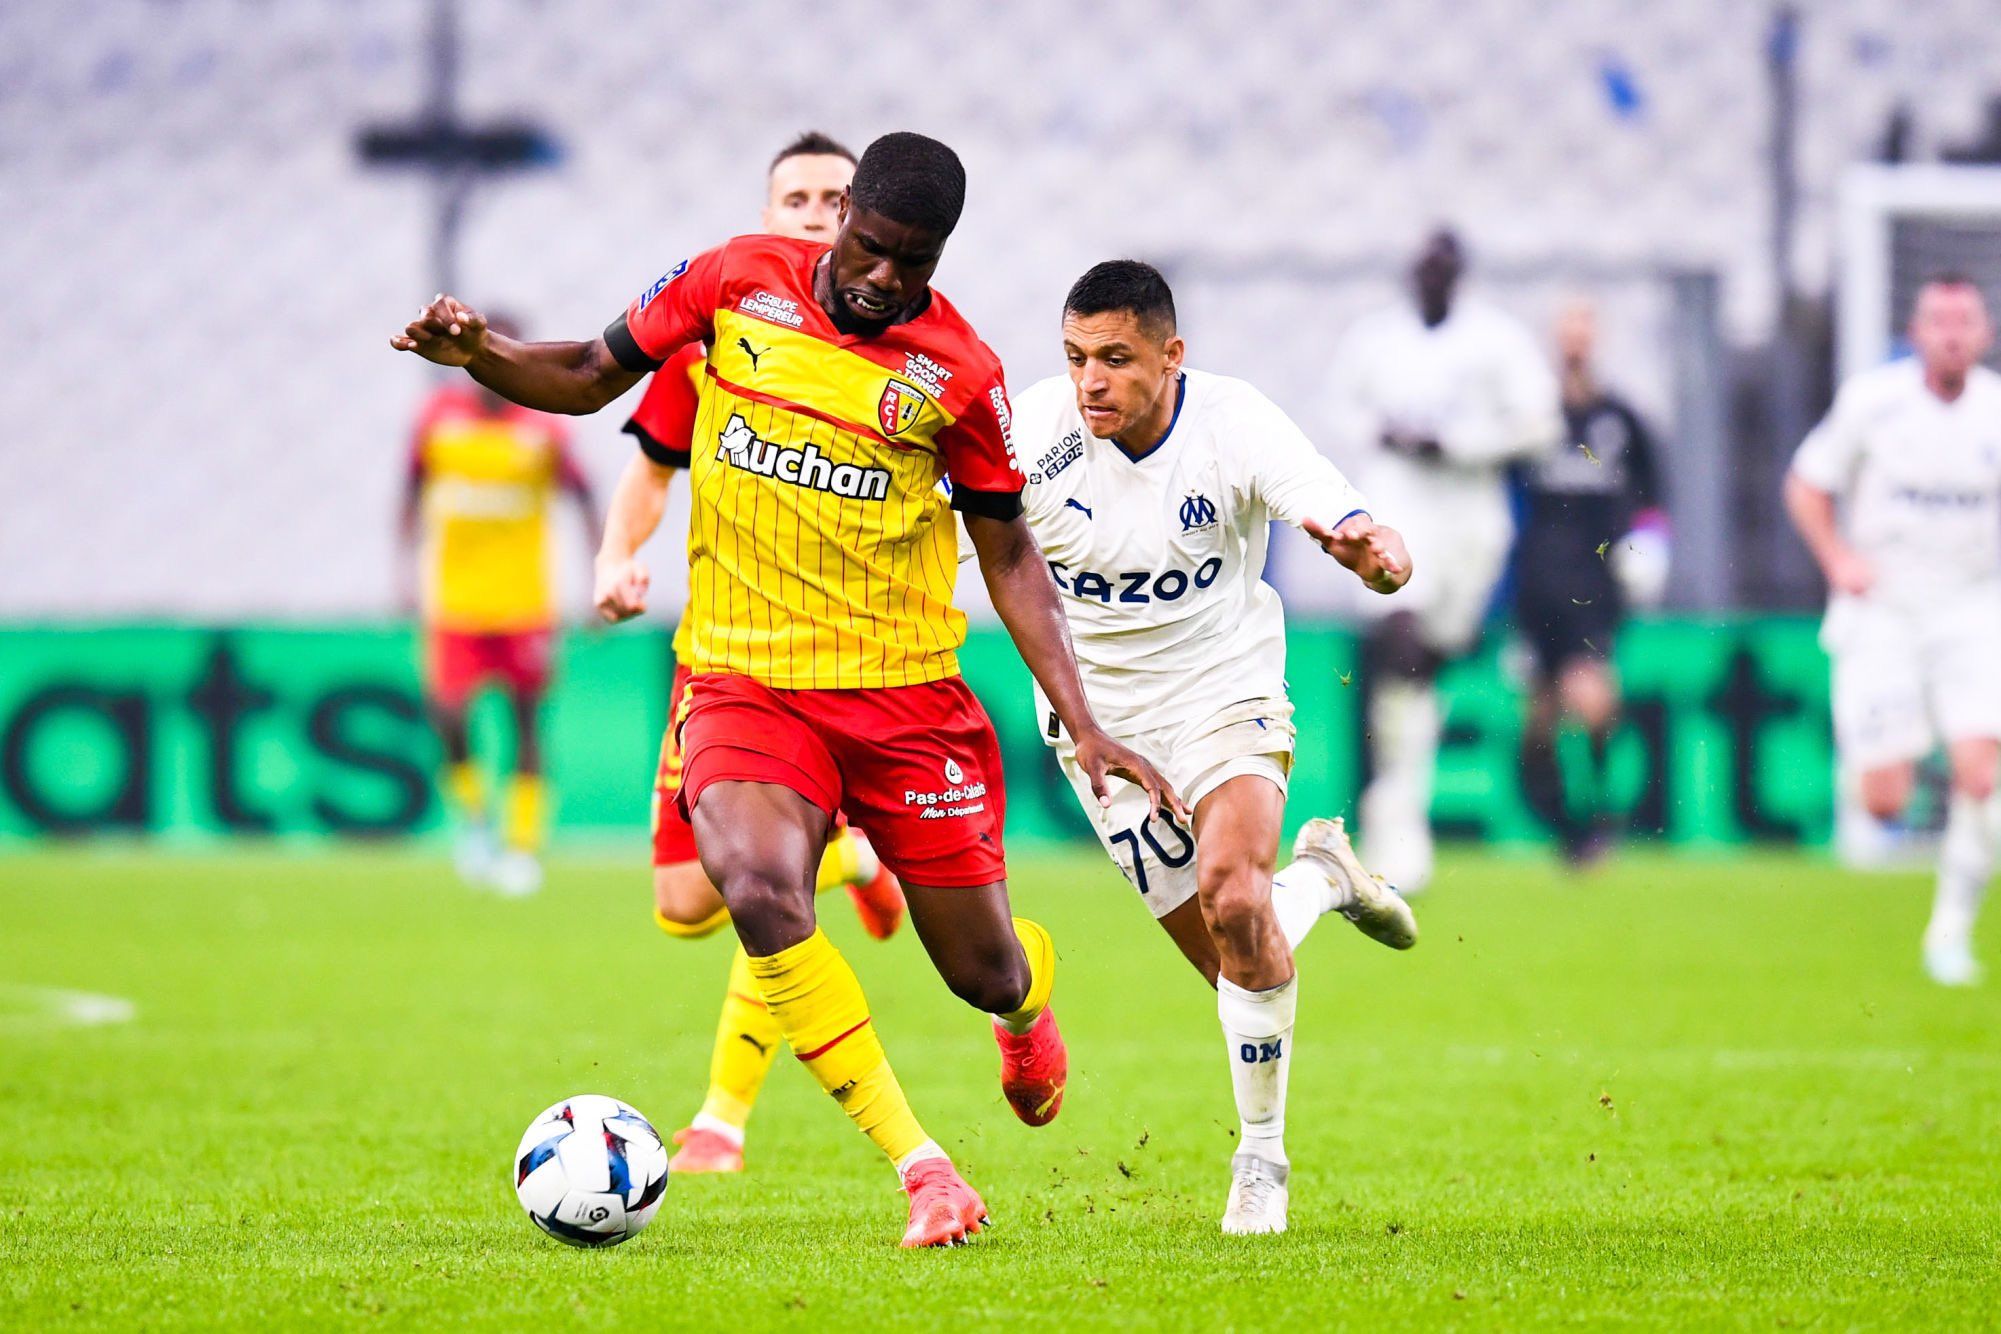 Lens vs Toulouse: Prediction, Odds, Betting Tips, and How to Watch | 28/10/2022